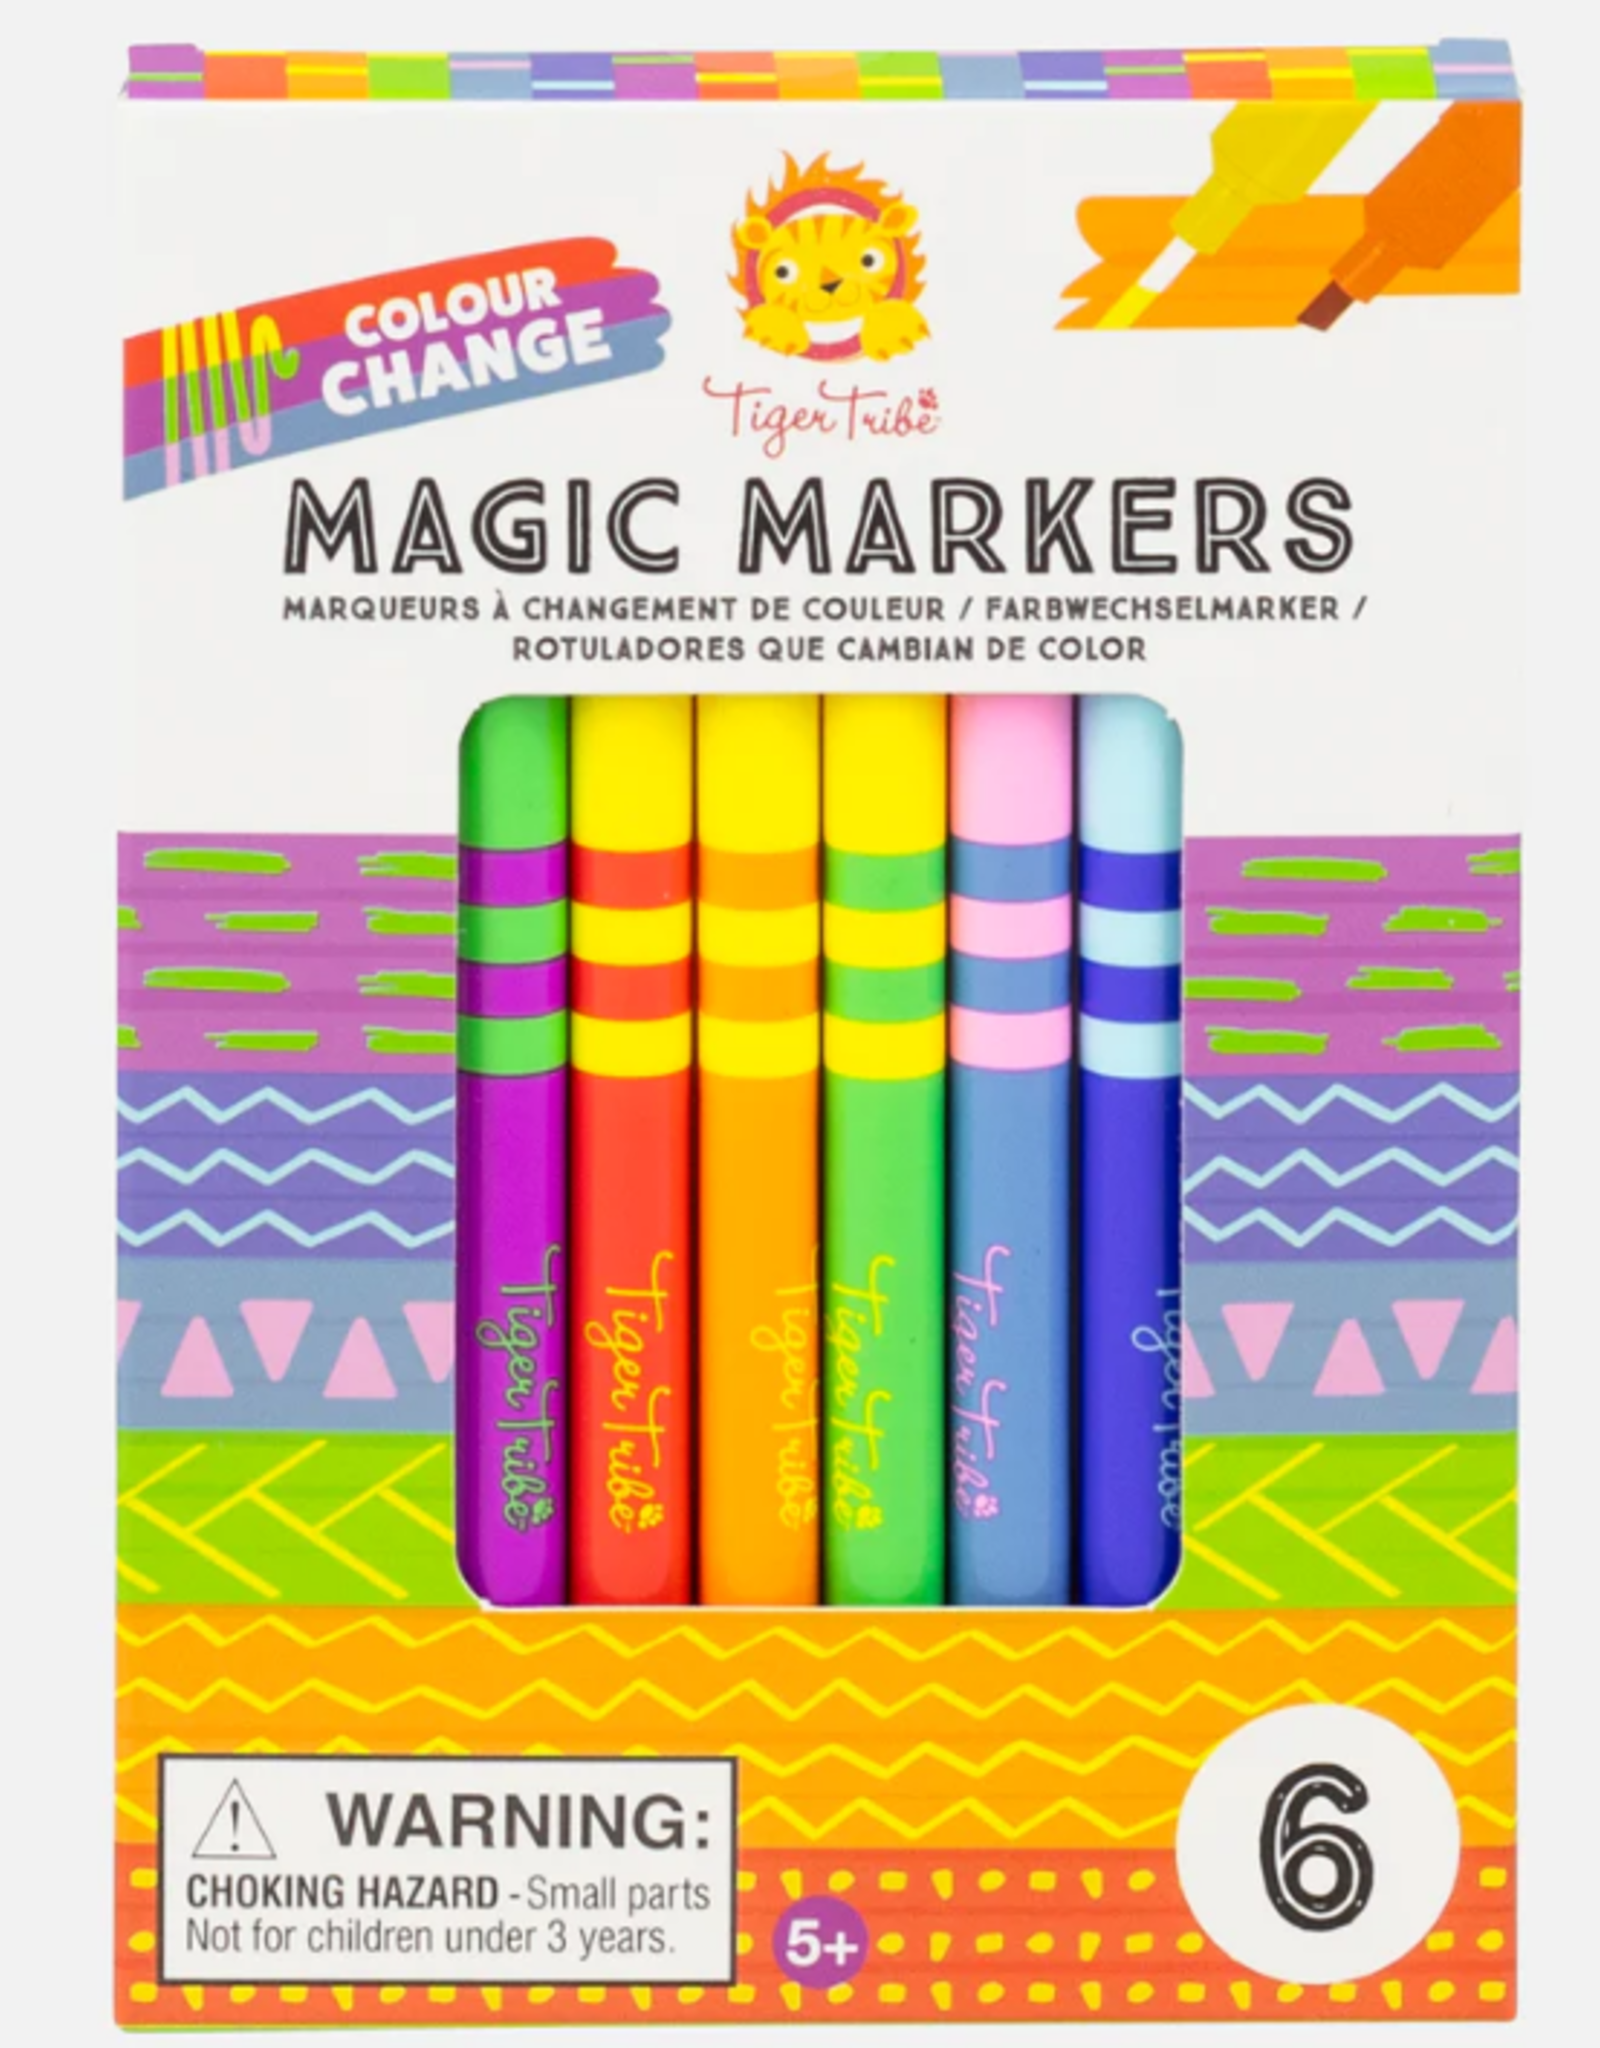 Tiger Tribe Colour Change Markers